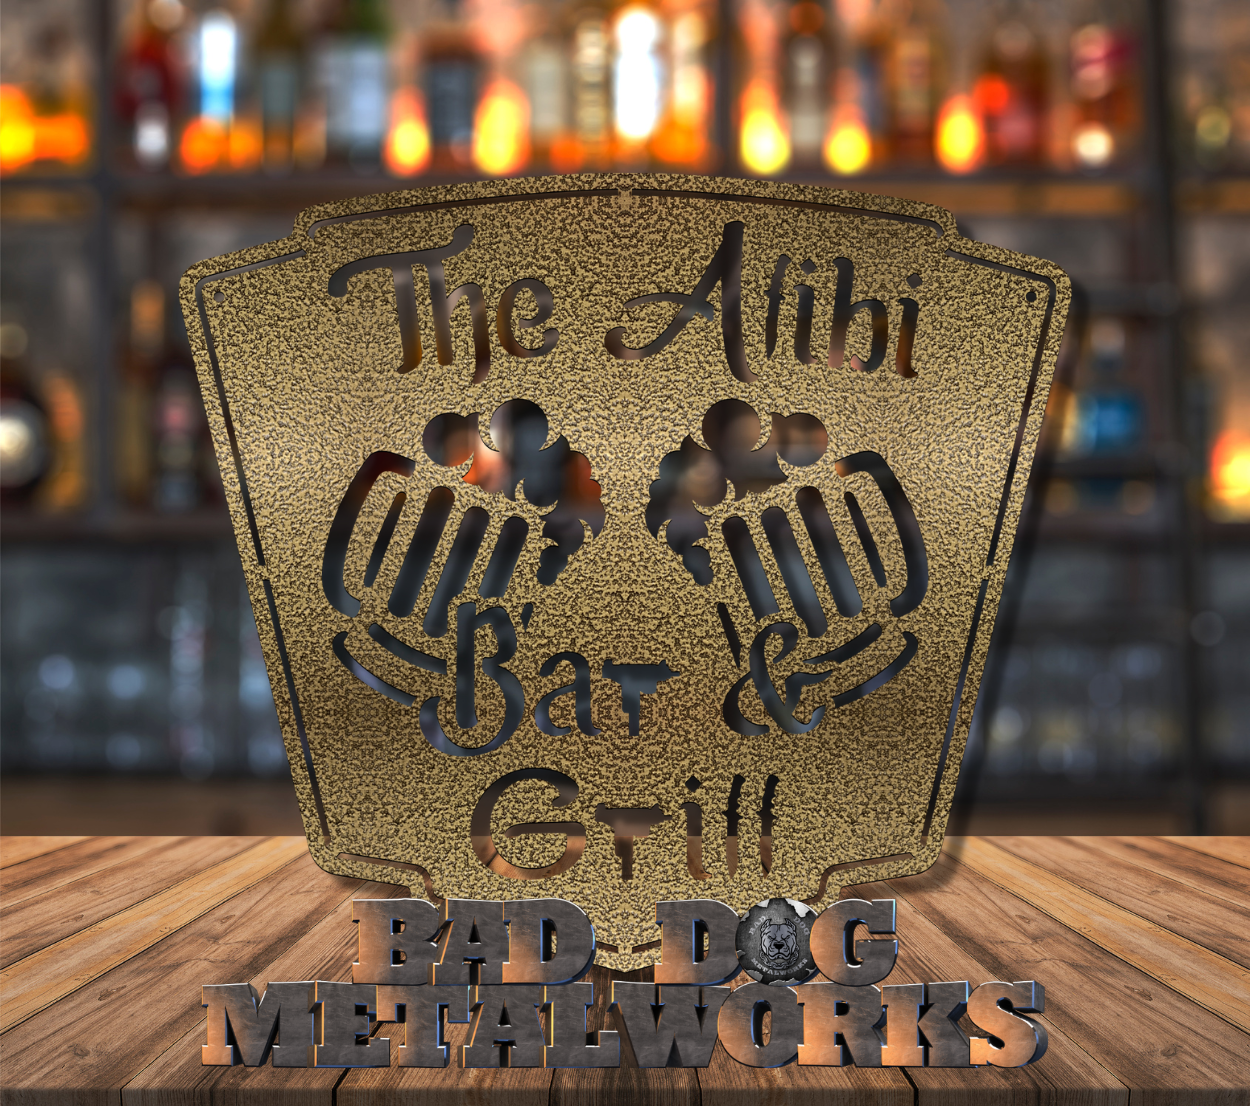 The Alibi Bar and Grill